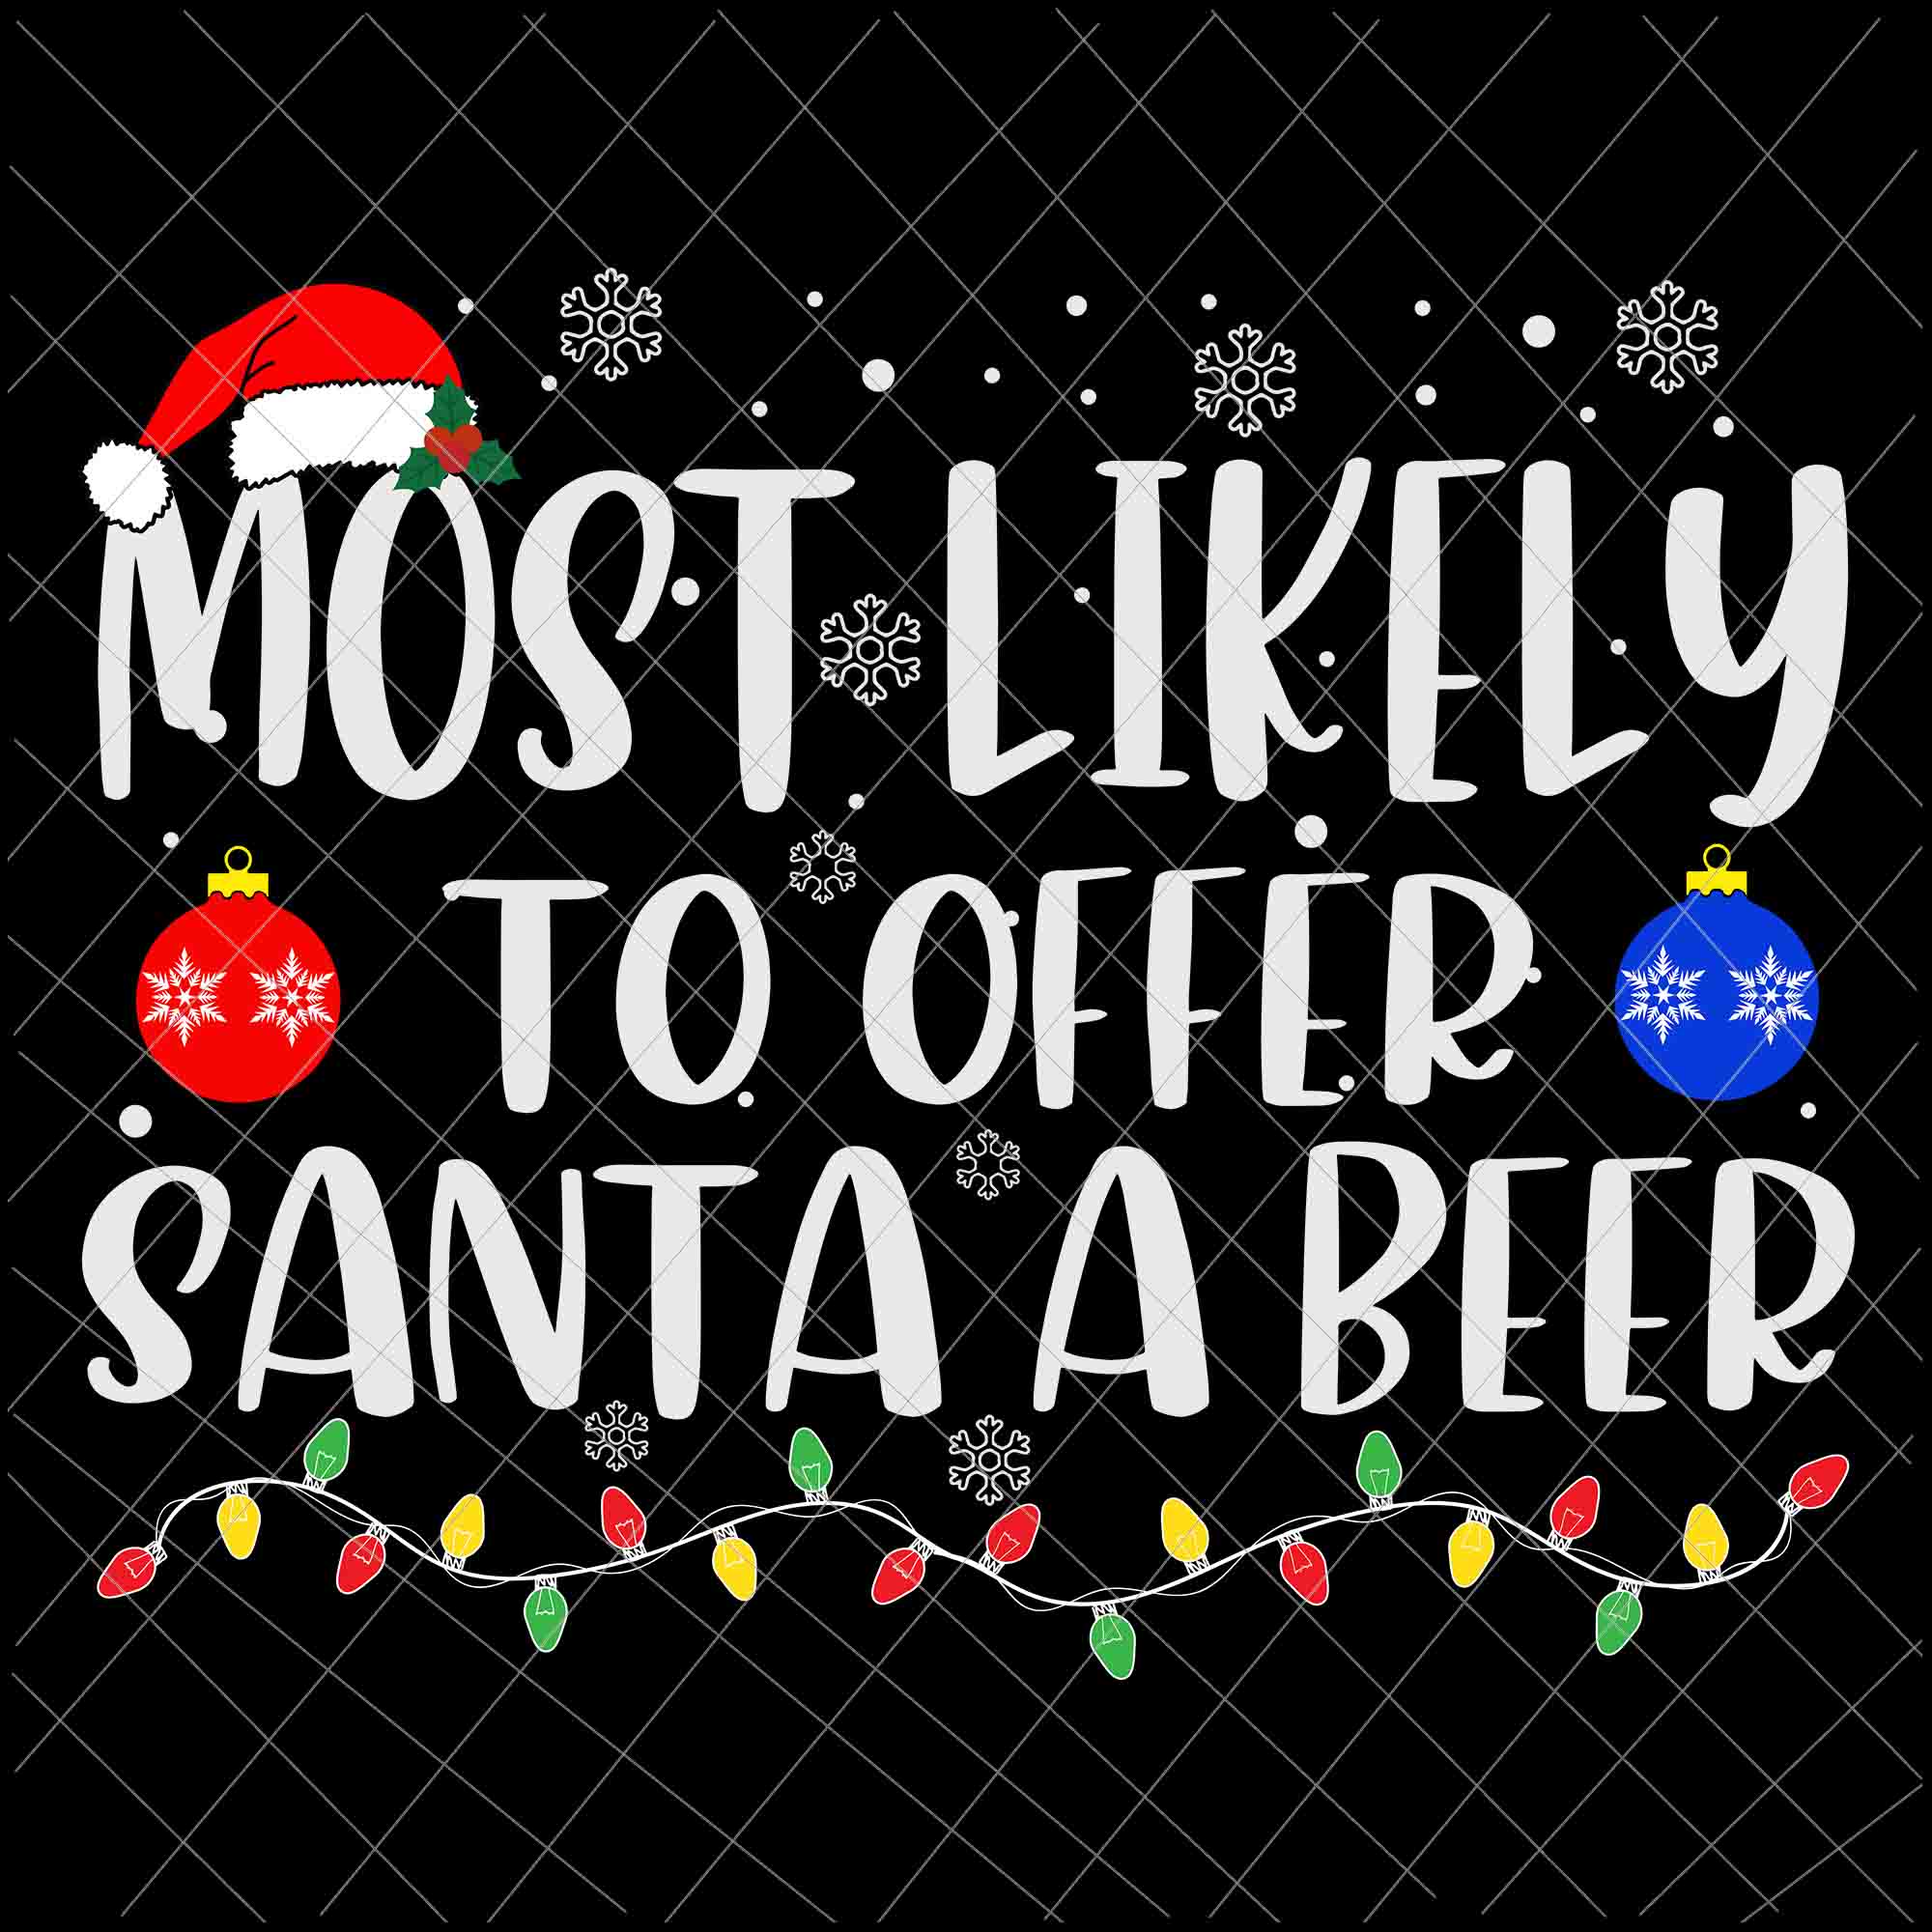 Most Likely To Offer Santa A Beer Svg, Family Christmas Svg, Most Likely Svg, Family Xmas Svg, Quote Beer Christmas